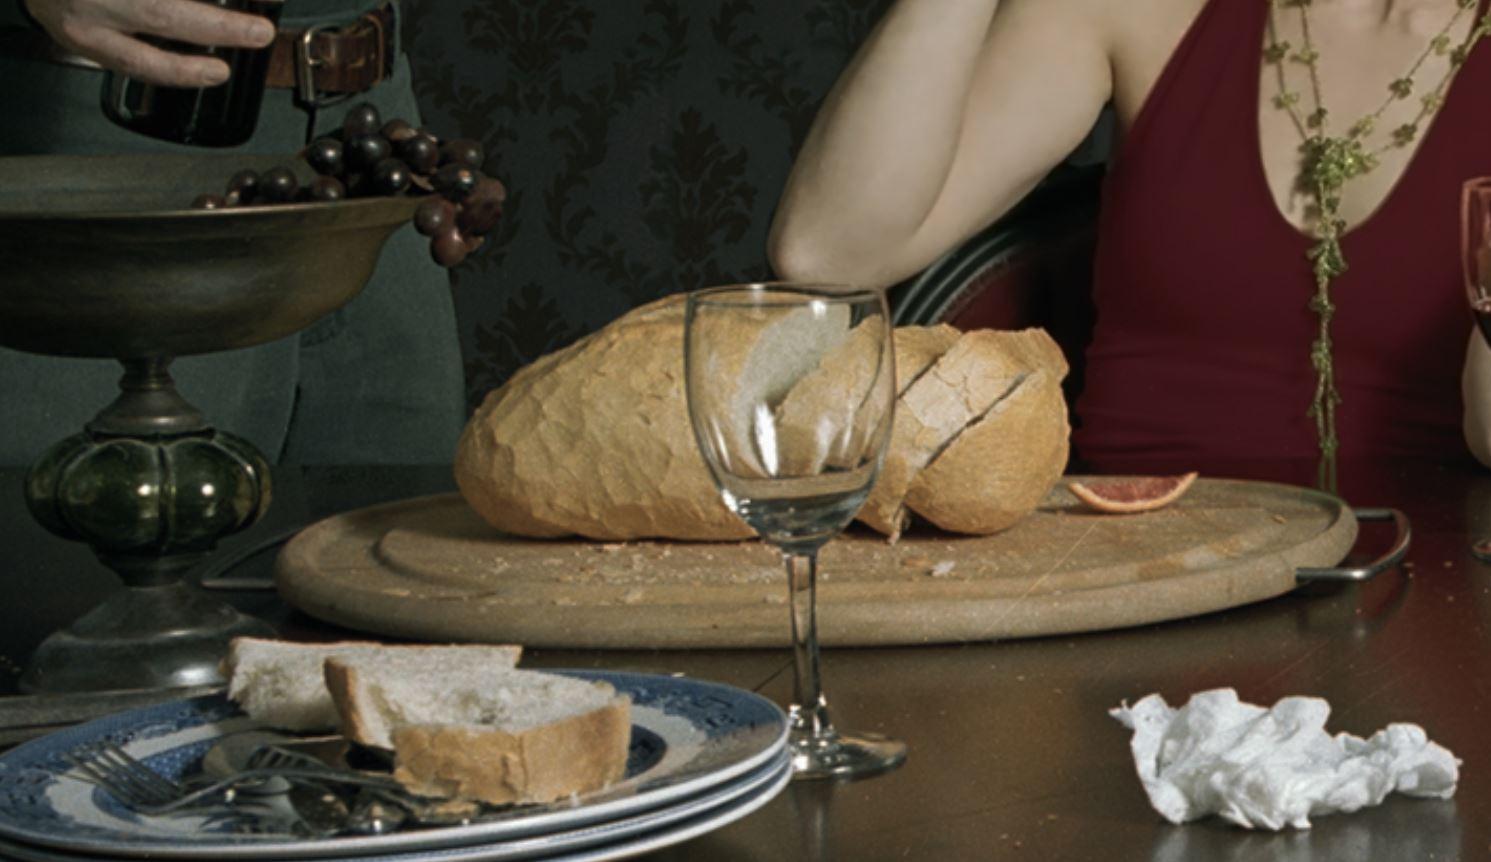 Dinner Party - Contemporary Art, Photography, Early 21st Century - Black Figurative Print by Julie Blackmon